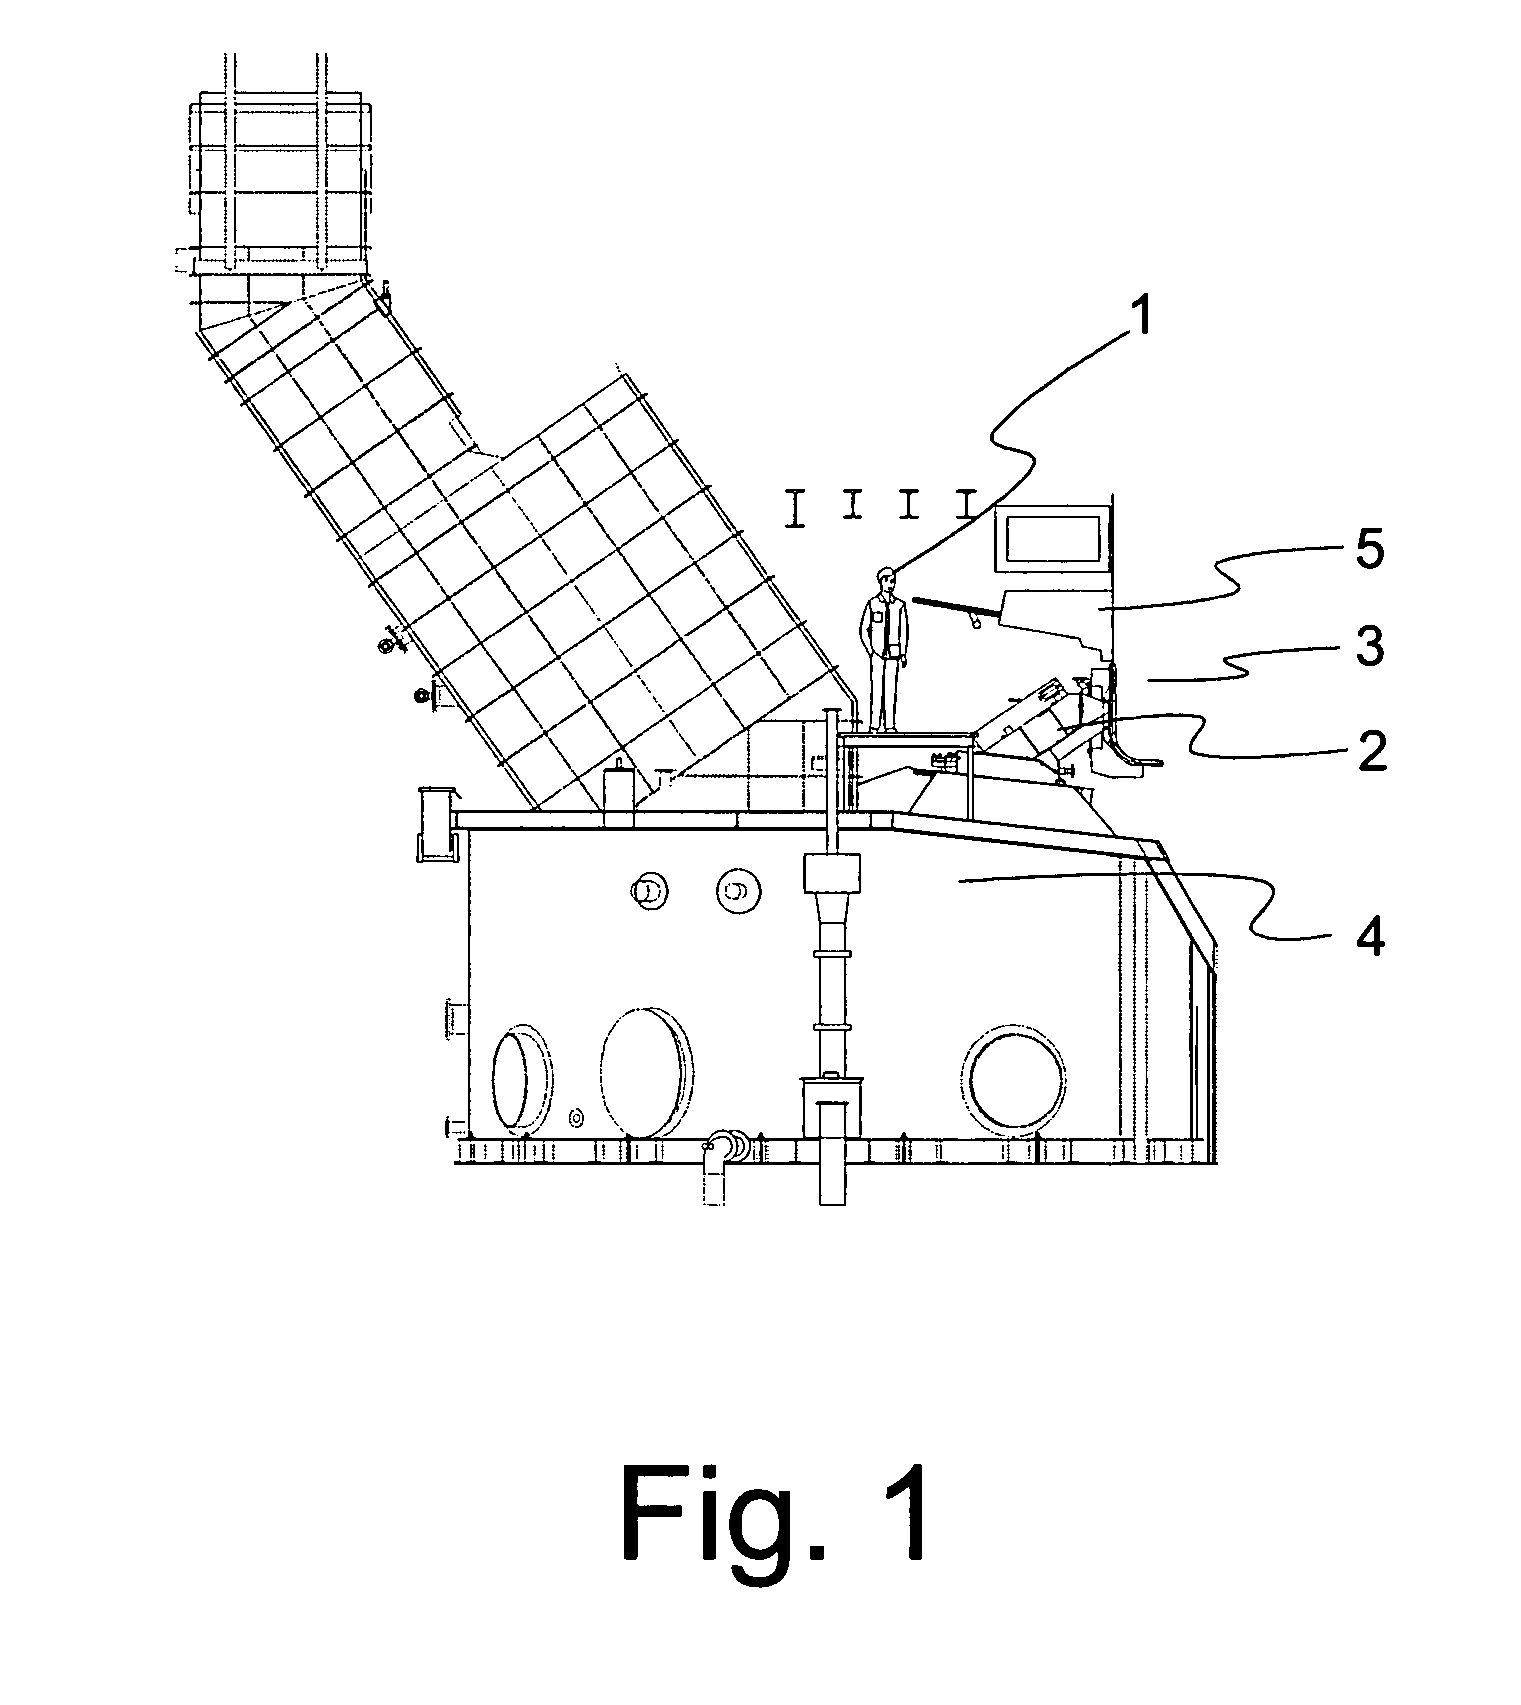 Shielding arrangement for the smelt spout area of a recovery boiler